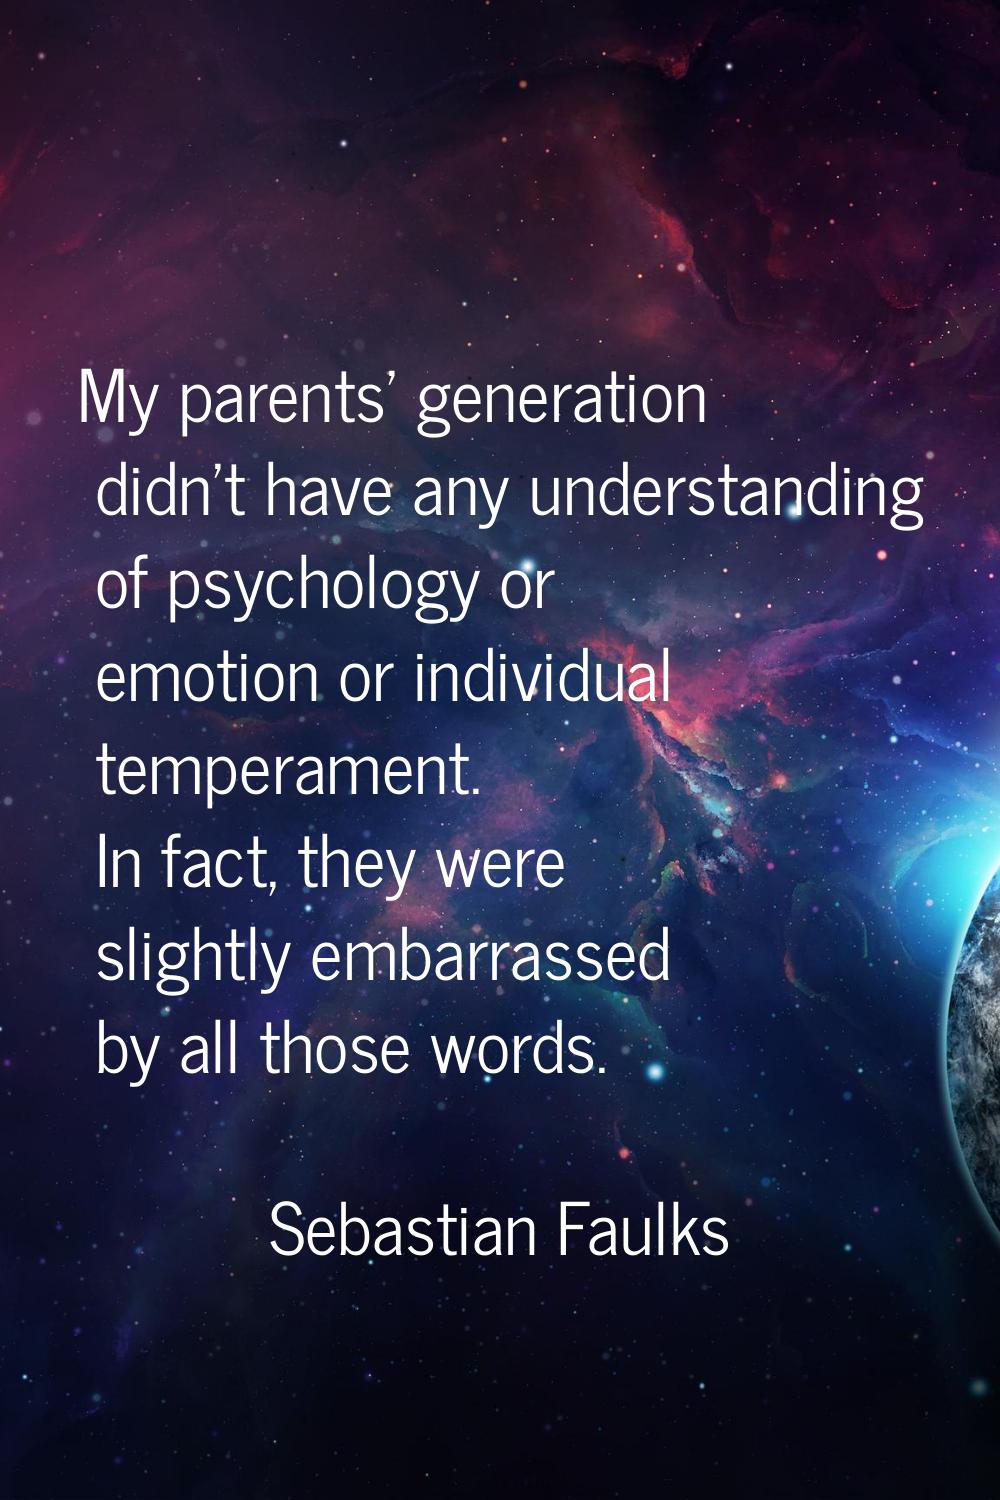 My parents' generation didn't have any understanding of psychology or emotion or individual tempera